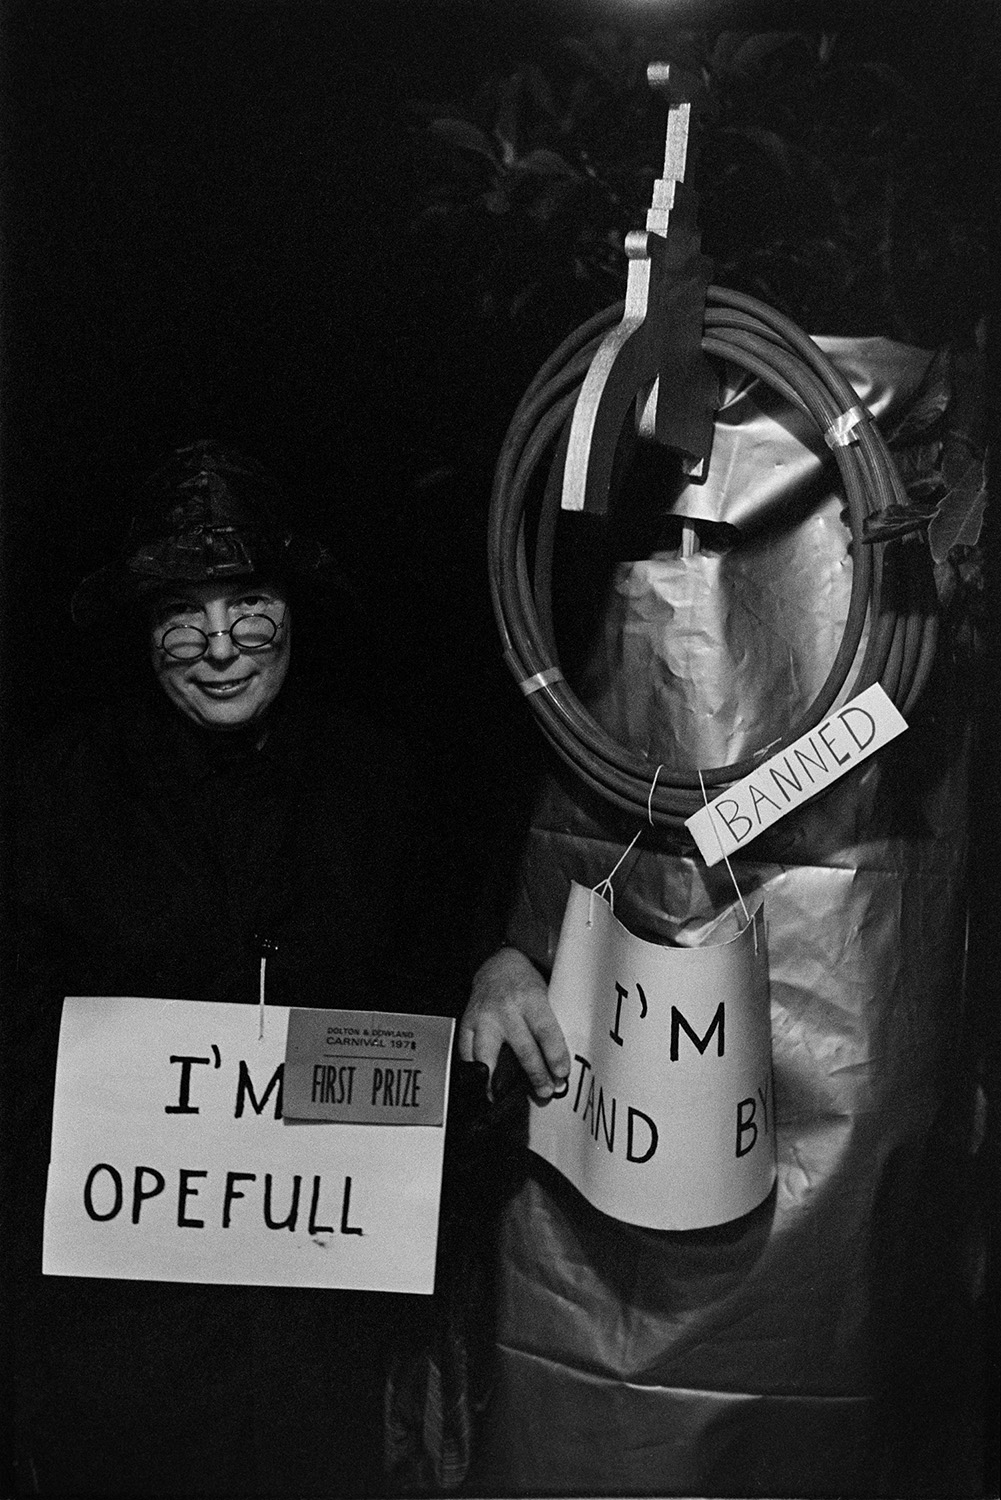 Stalls and floats at carnival at night, Carnival Queen. 
[Two people in costumes at Dolton Carnival who won first prize. One person is carrying an 'I'm Opefull' sign and the other is dressed as a tap with a pipe and is carrying a sign reading 'I'm Stand By'.]